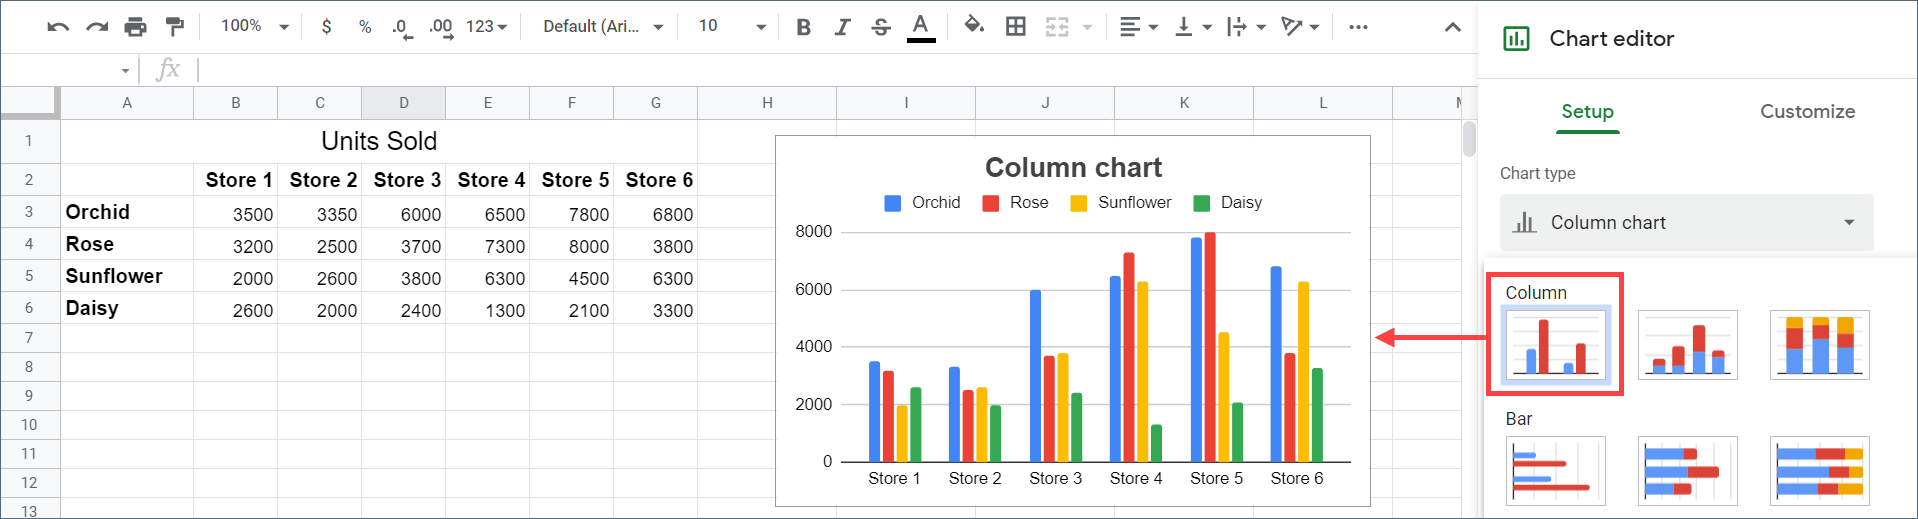 How to make a column chart in Google Sheets